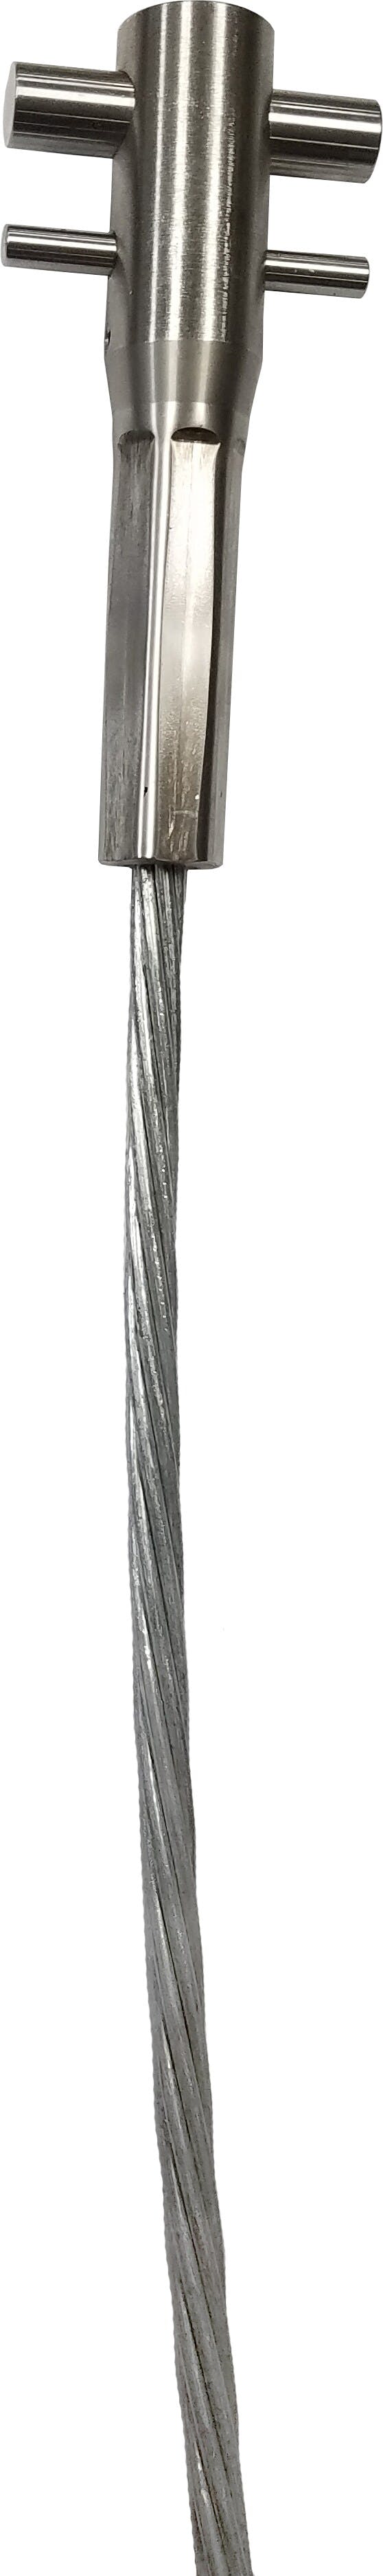 3M™ DBI-SALA® Lad-Saf™ Swaged Cable 6115017, 3/8 Inch, Stainless Steel, 30 m